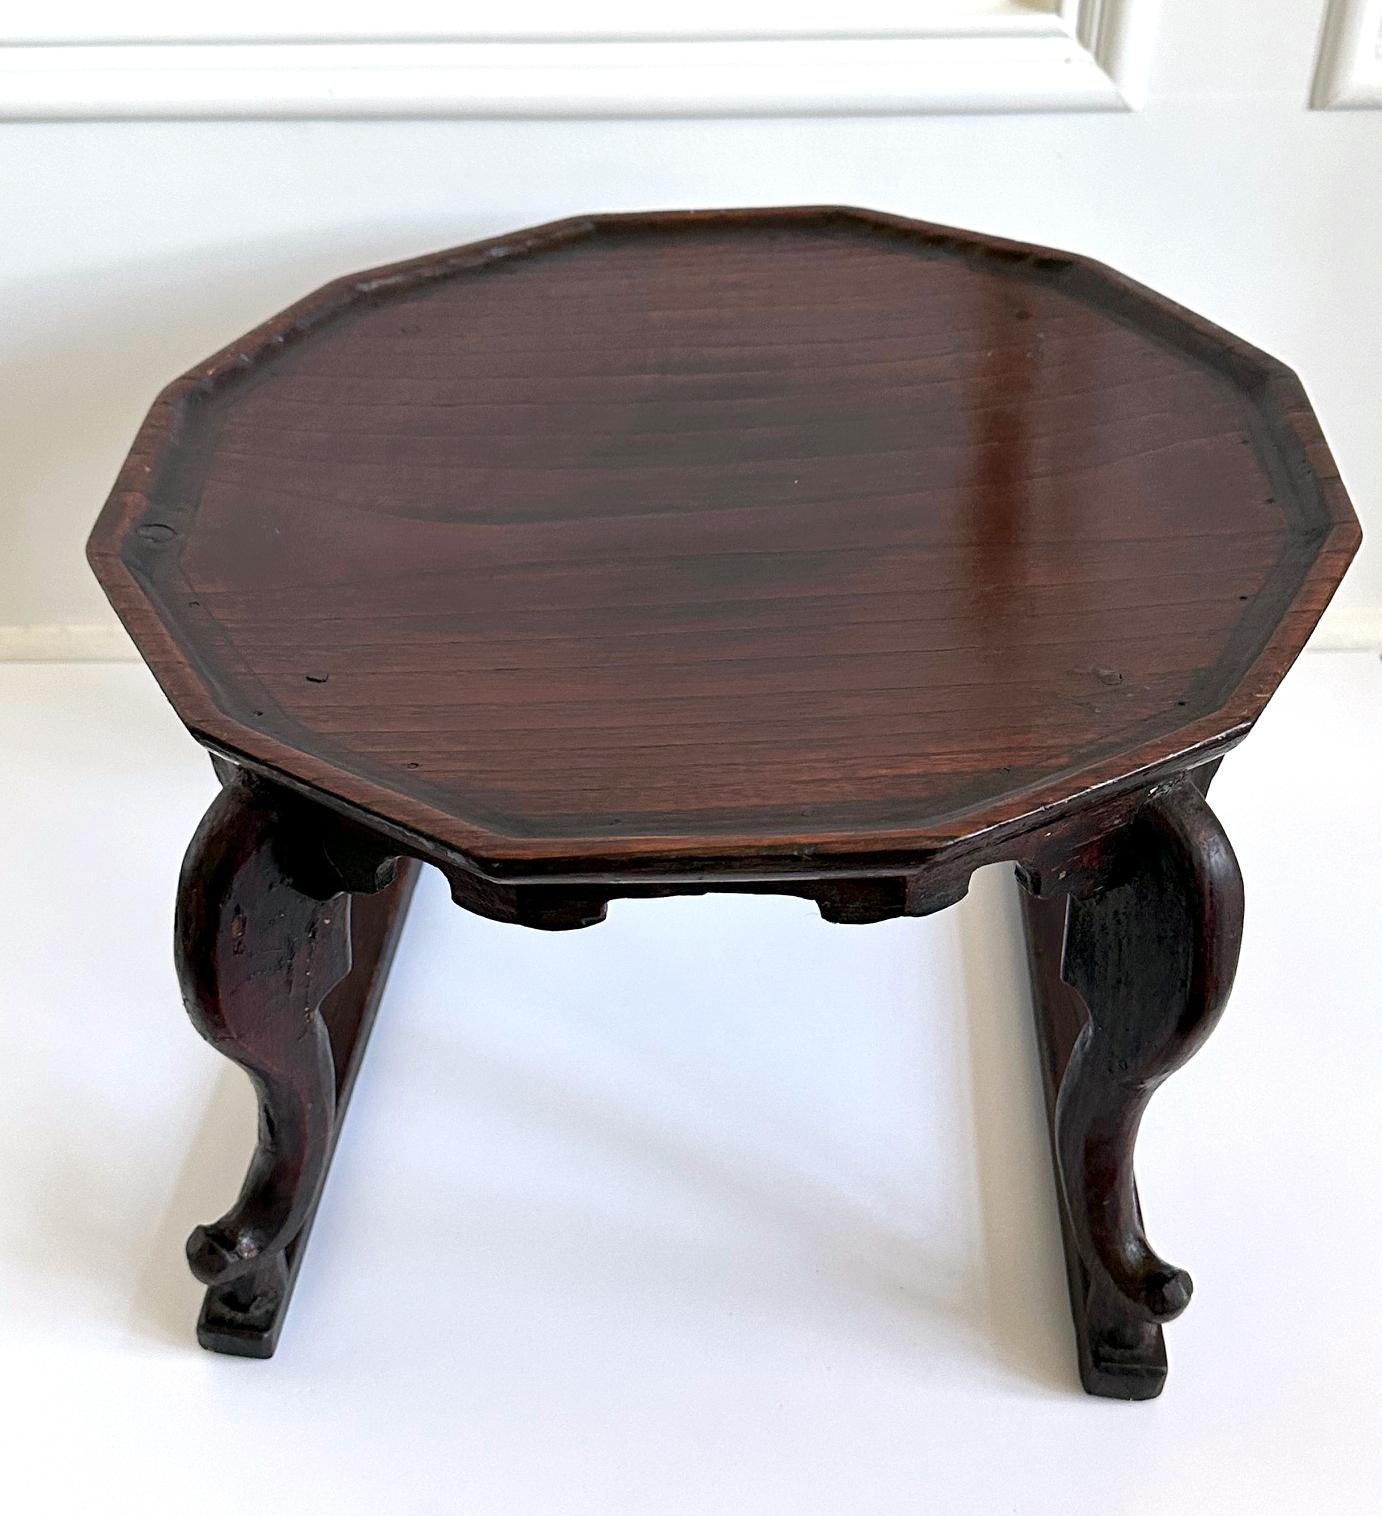 An antique wood table from Korea from late 19th century (end of Joseon Dynasty). This type of light weight table is called 